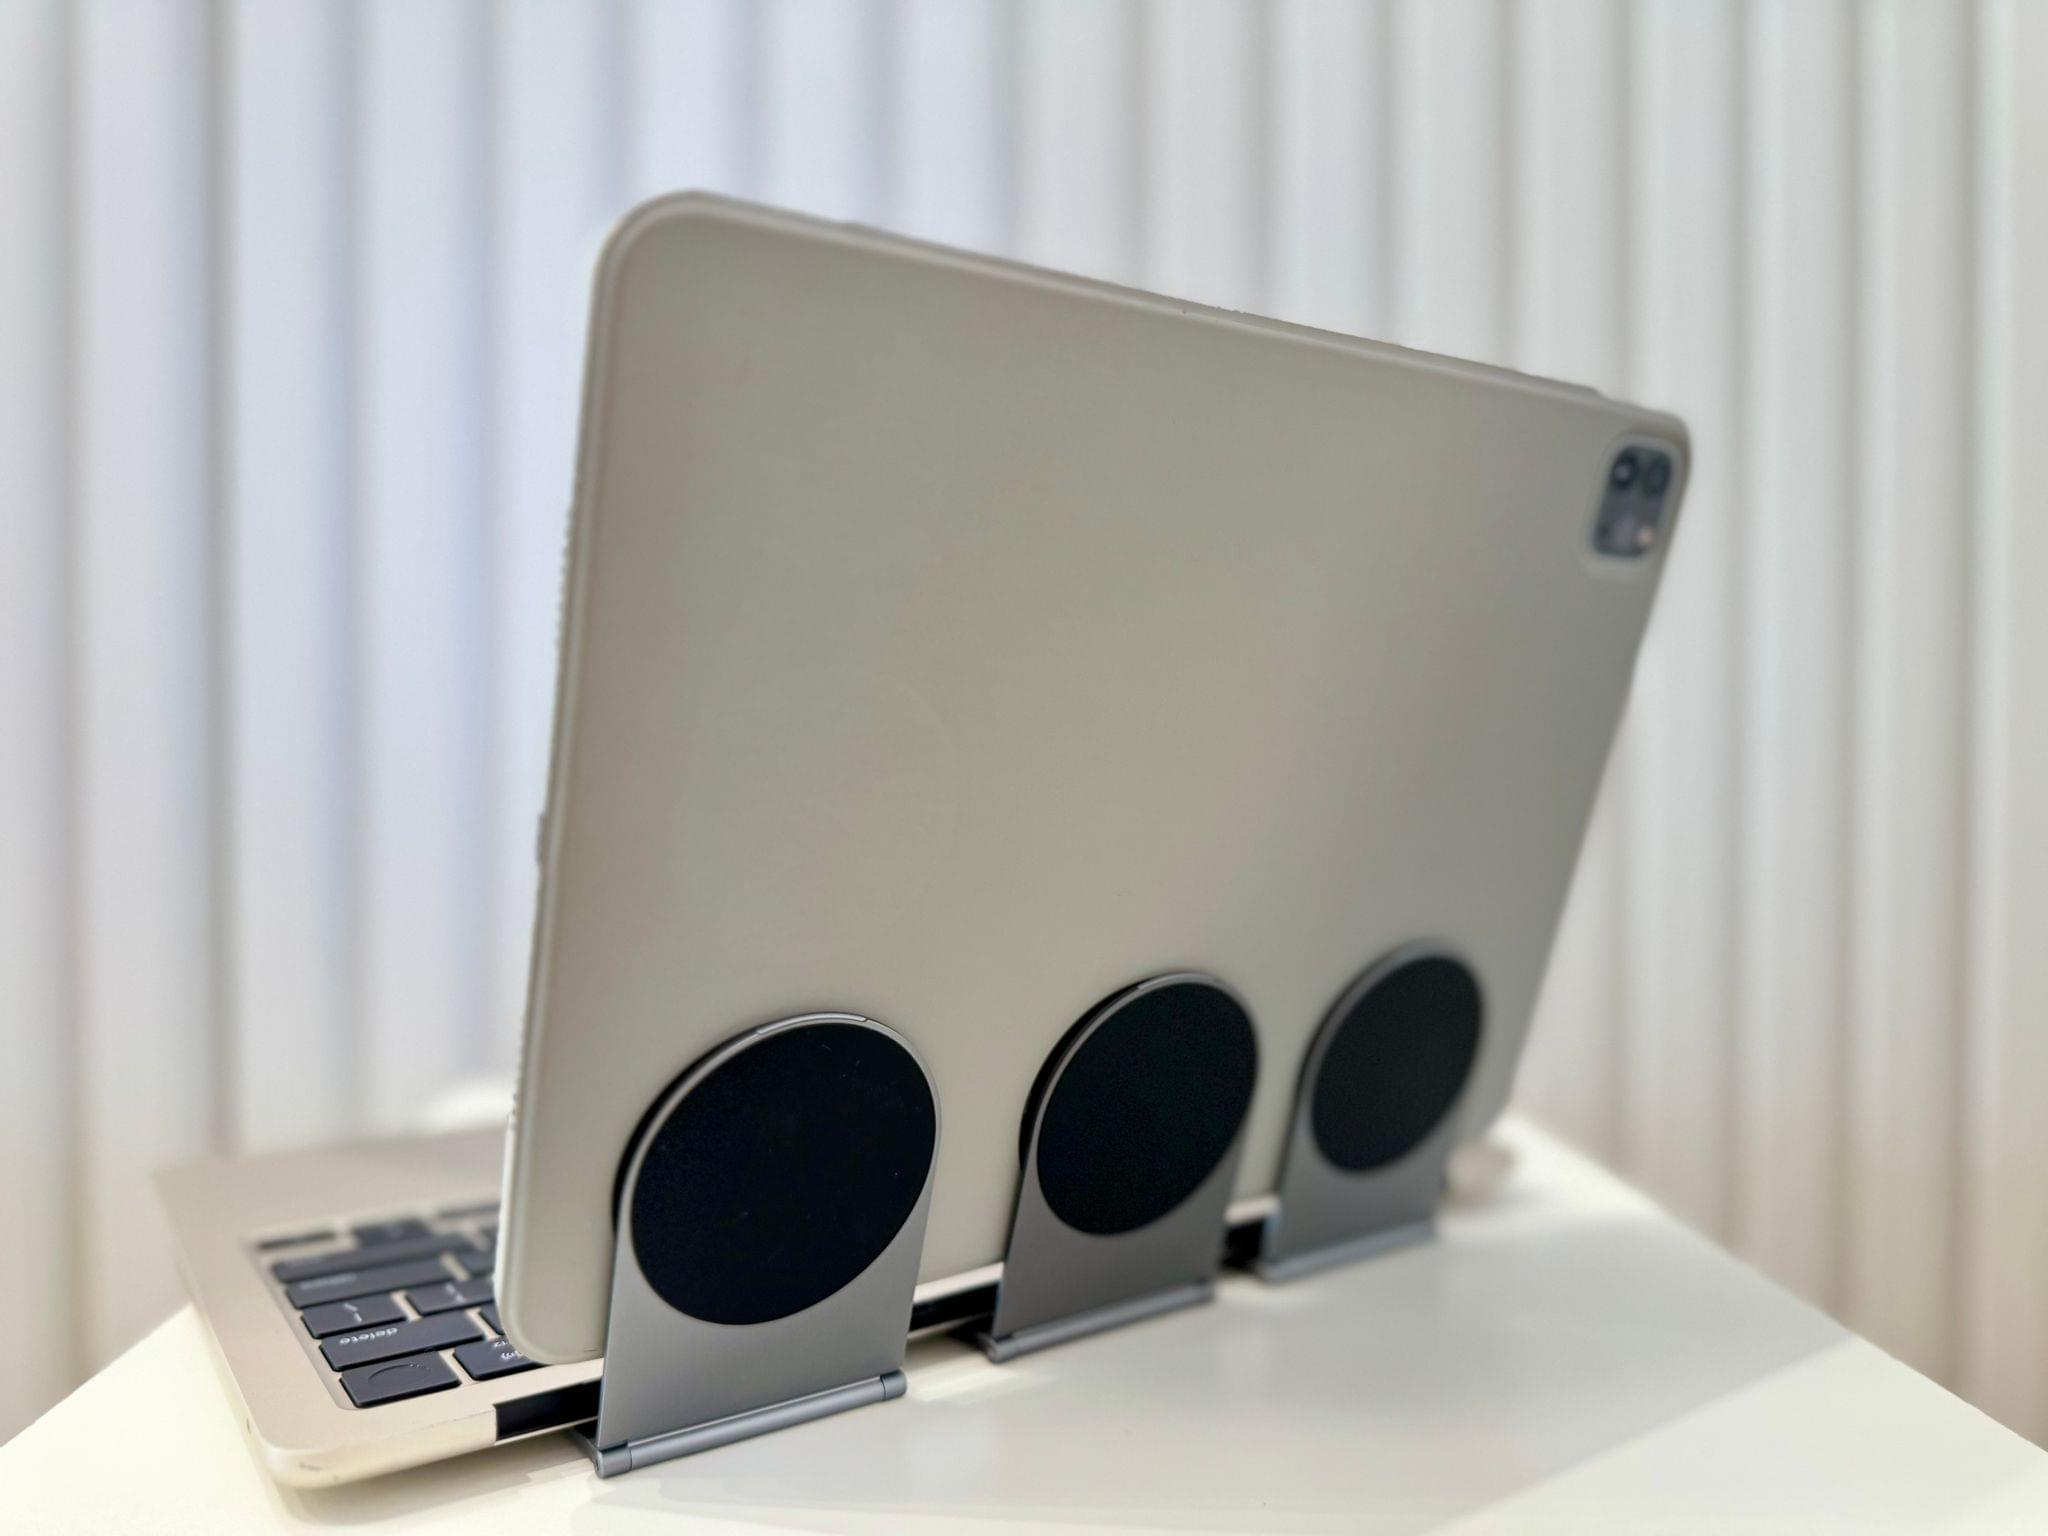 The three magnets that hold the iPad in place.